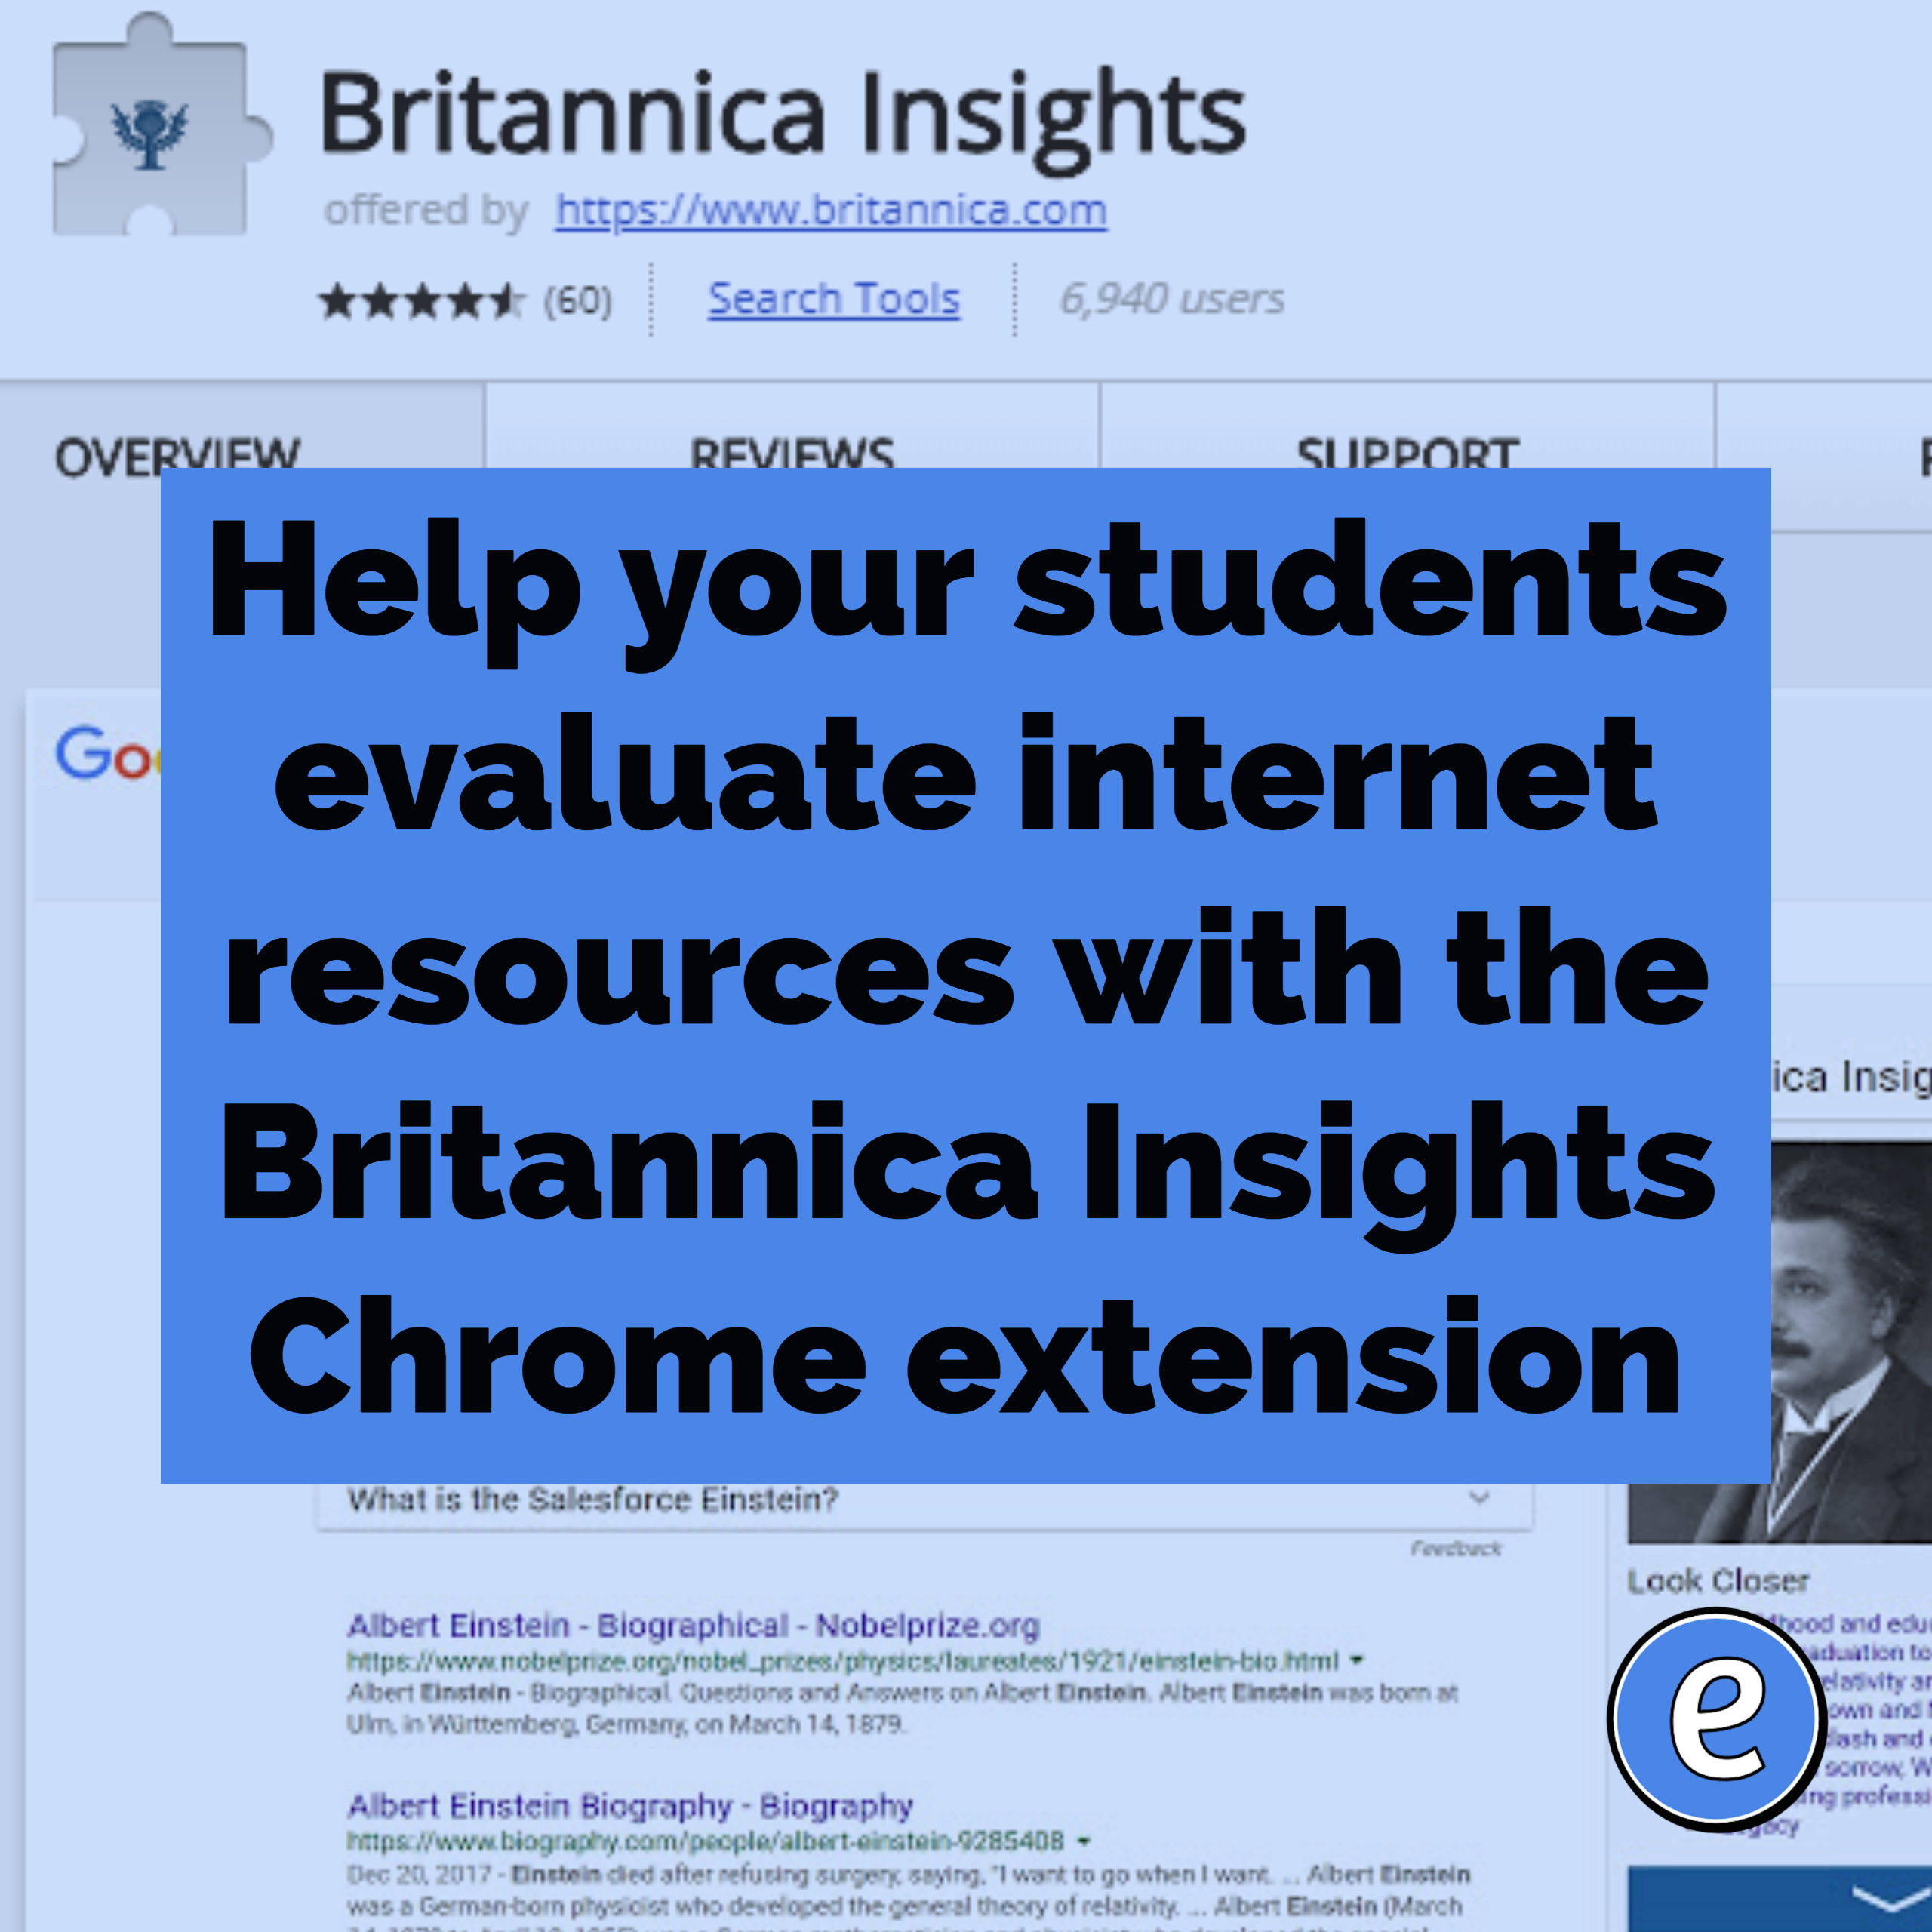 Help your students evaluate internet resources with the Britannica Insights Chrome extension